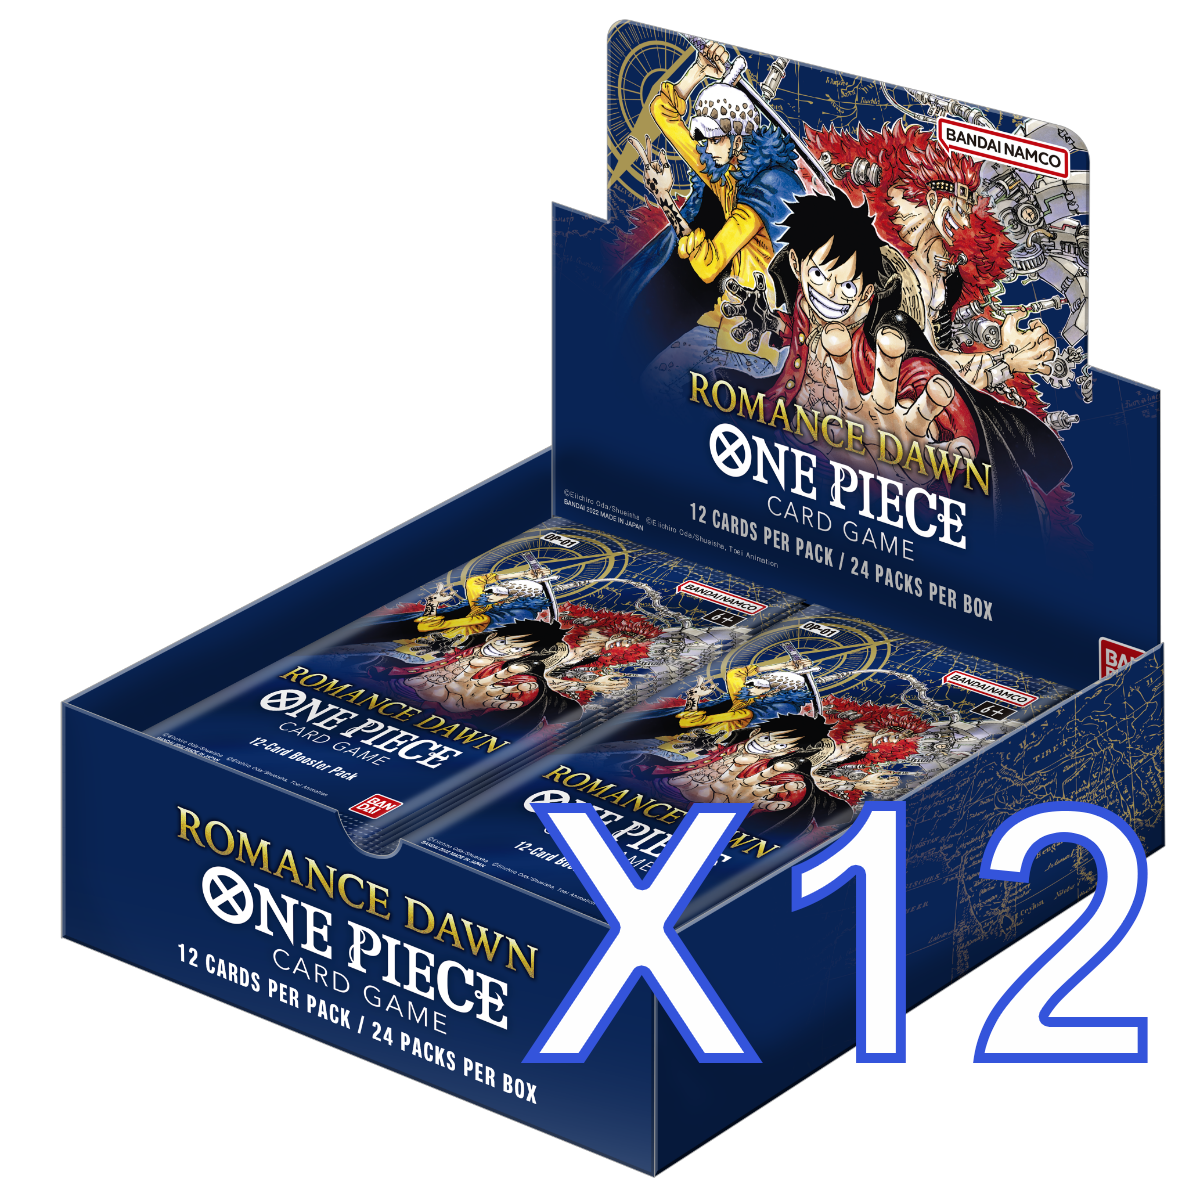 One Piece Card Game - Romance Dawn OP-01 Booster Box Sealed Case (12 Boxes)